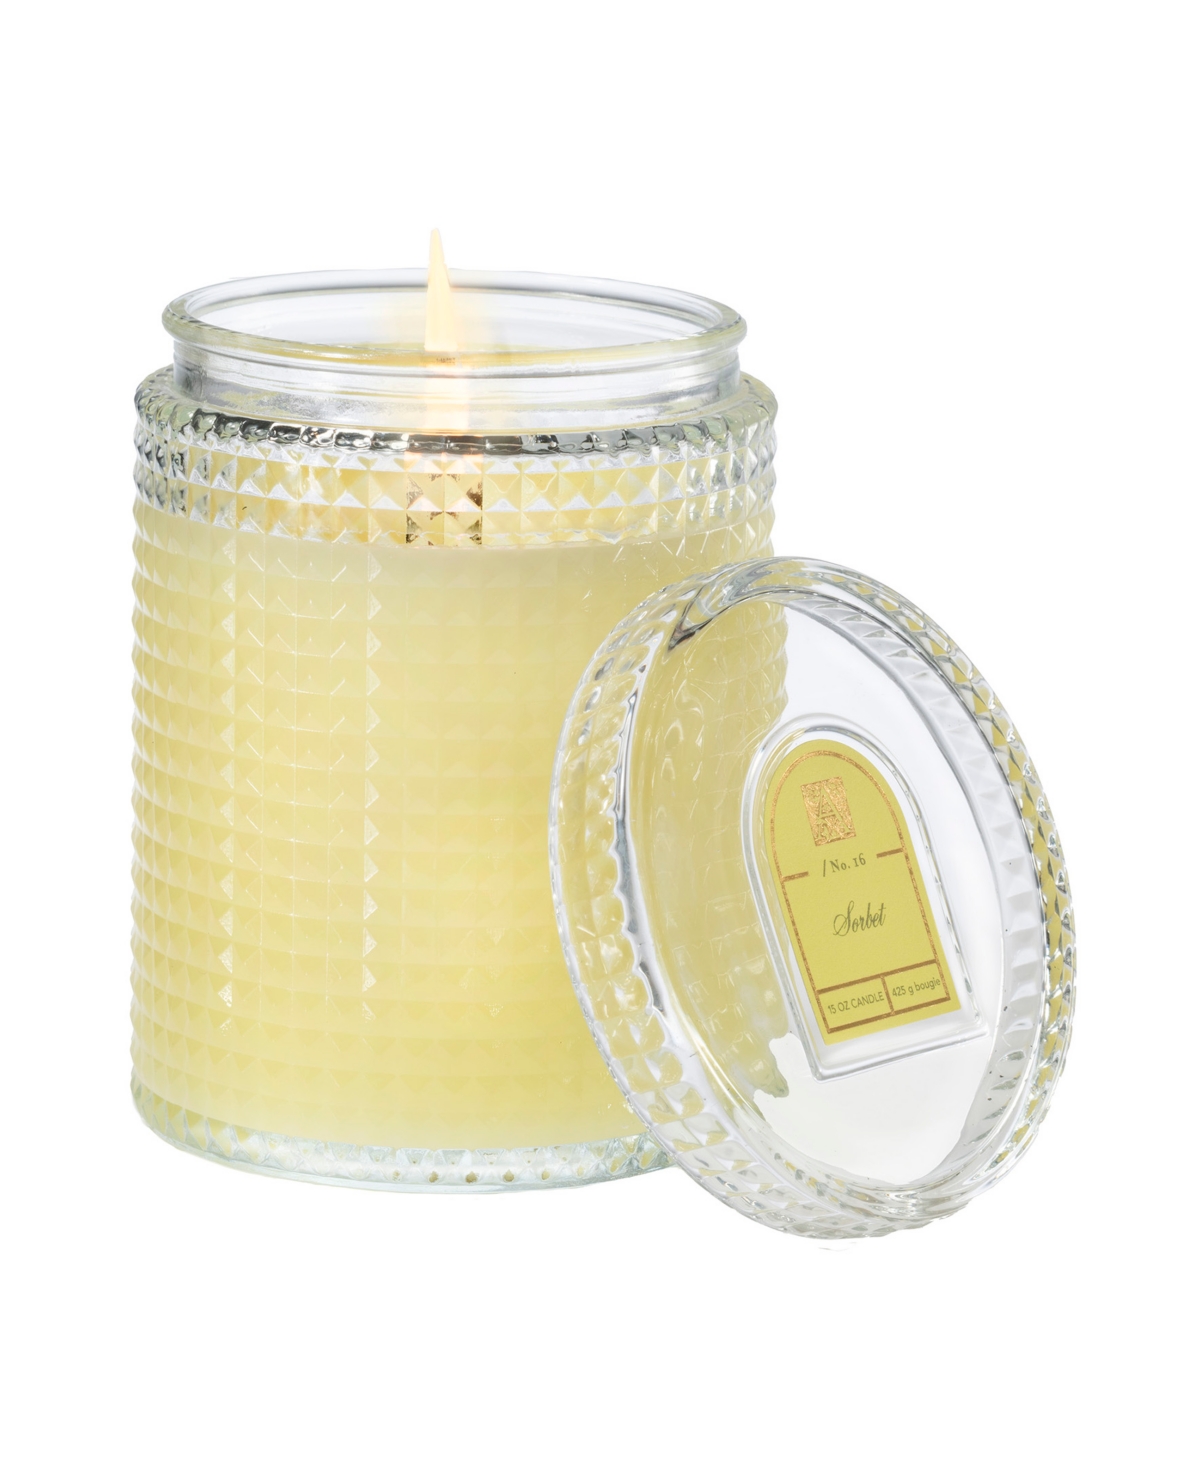 Sorbet Textured Glass Candle with Lid, 15 oz - Pale Yellow